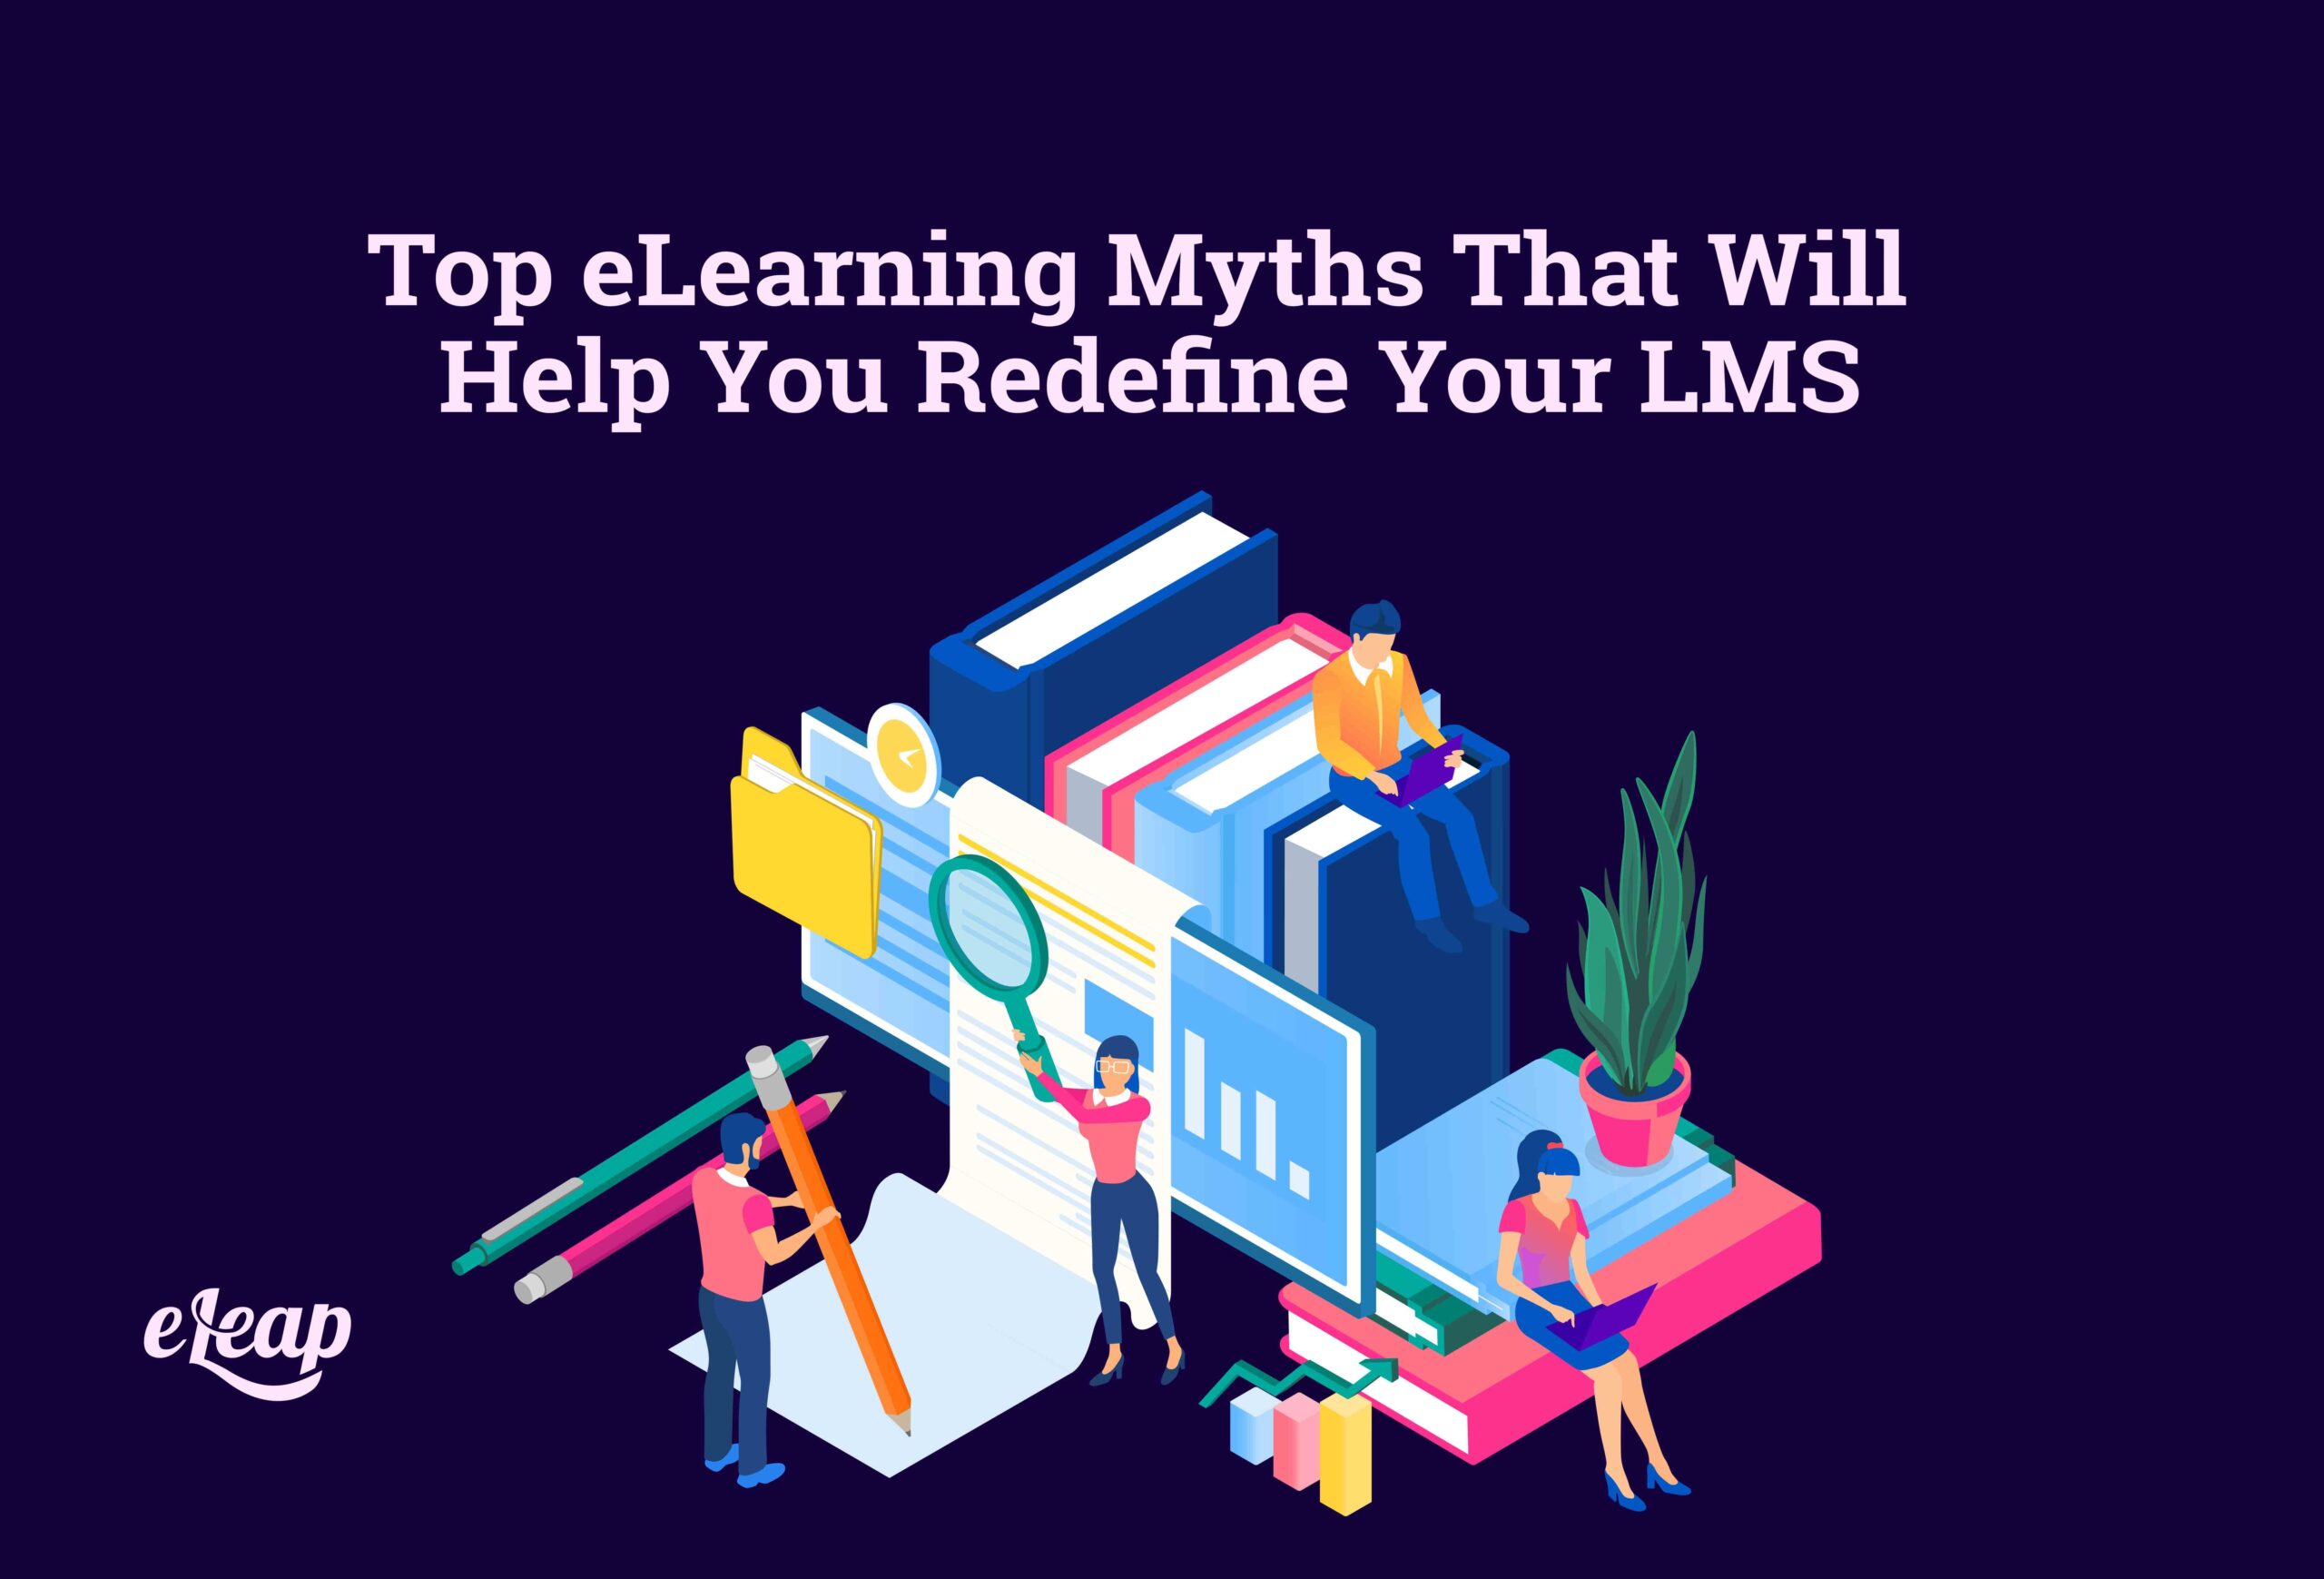 Top eLearning Myths That Will Help You Redefine Your LMS - eLeaP